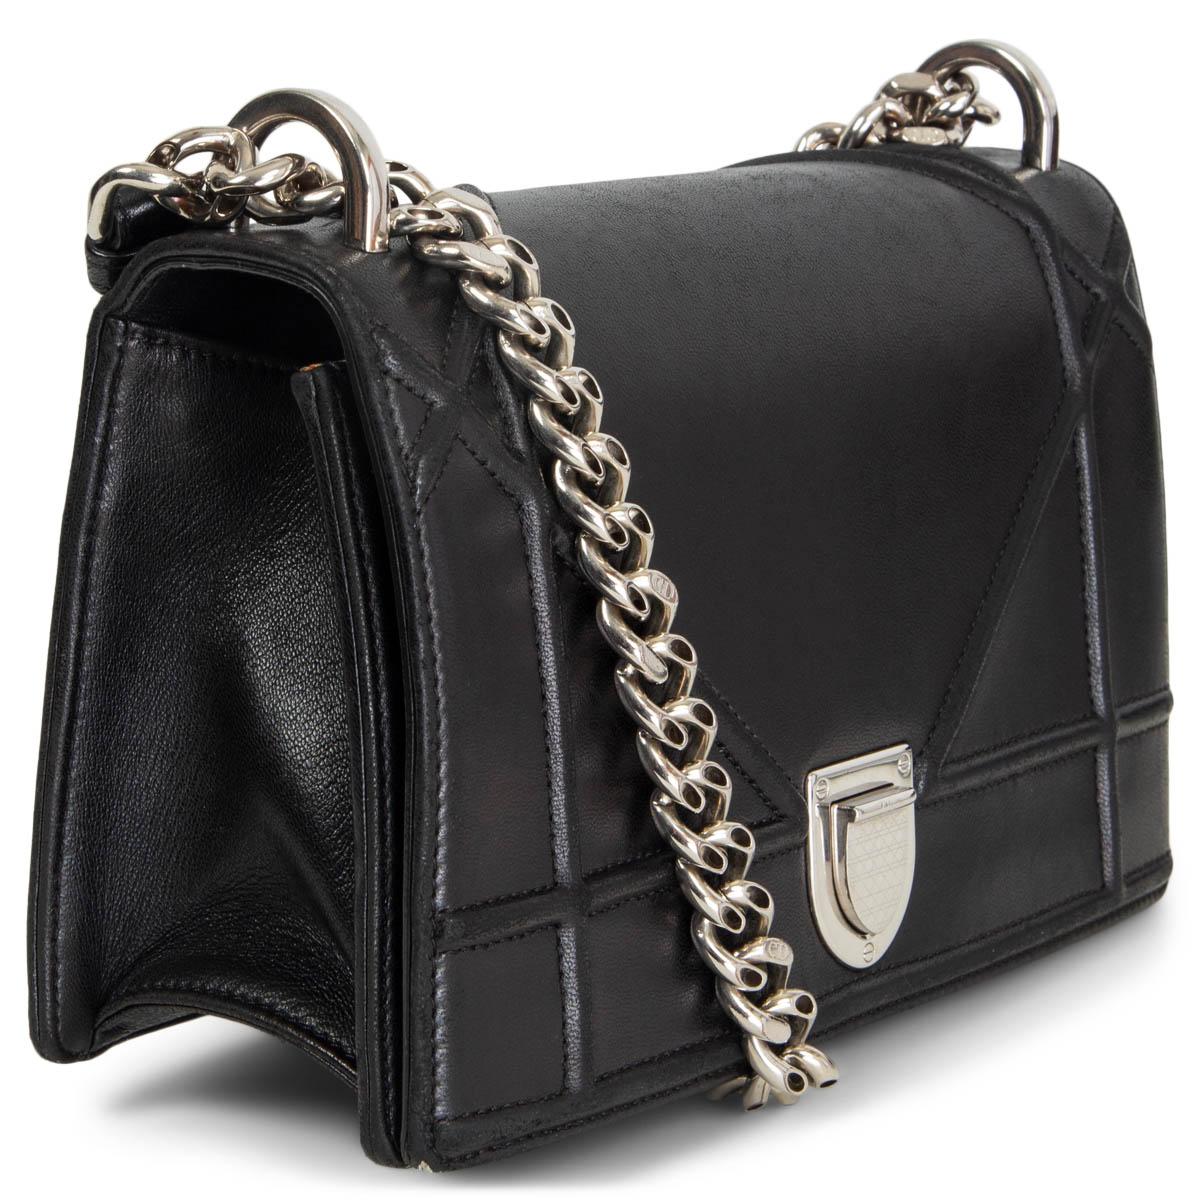 100% authentic Christian Dior Small Diorama shoulder flap bag in black smooth leather. Silver-tone metal chain and leather shoulder-strap. Lined in pale pink grosgrain fabric with an open pocket against the front and a zipper pocket against the